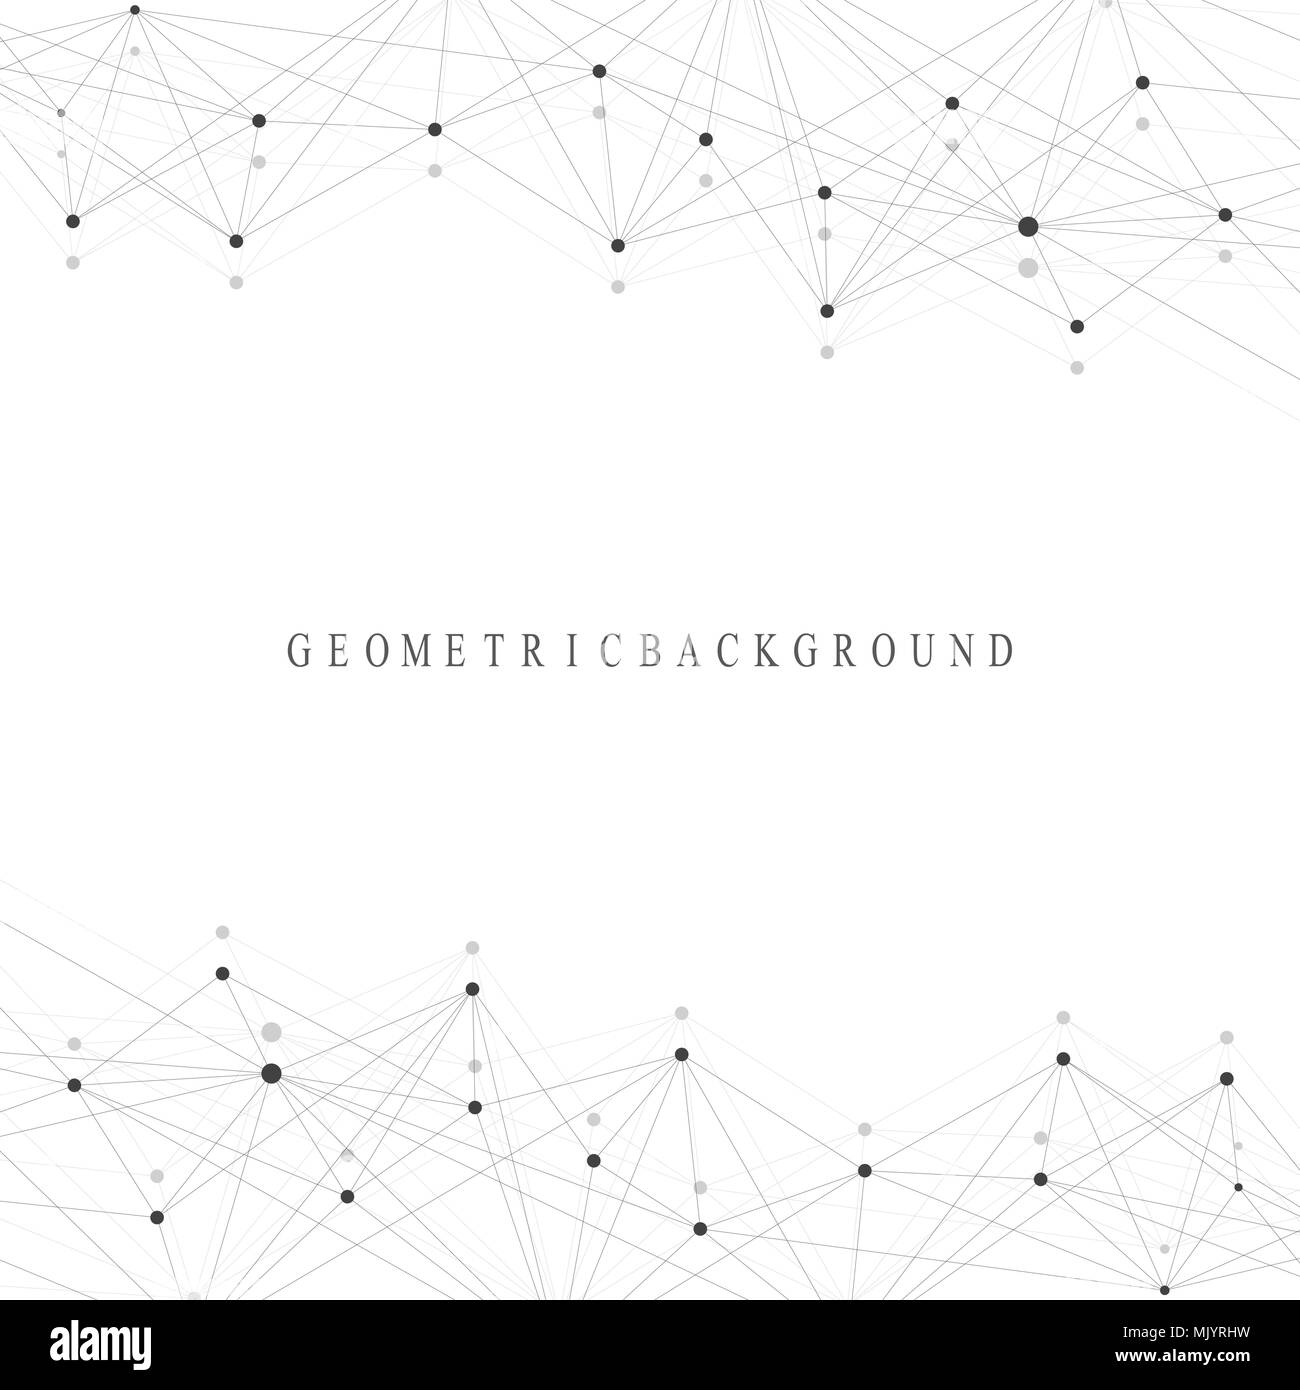 Geometric graphic background molecule and communication. Big data complex with compounds. Perspective backdrop. Minimal array. Digital data visualization. Scientific cybernetic vector illustration. Stock Vector